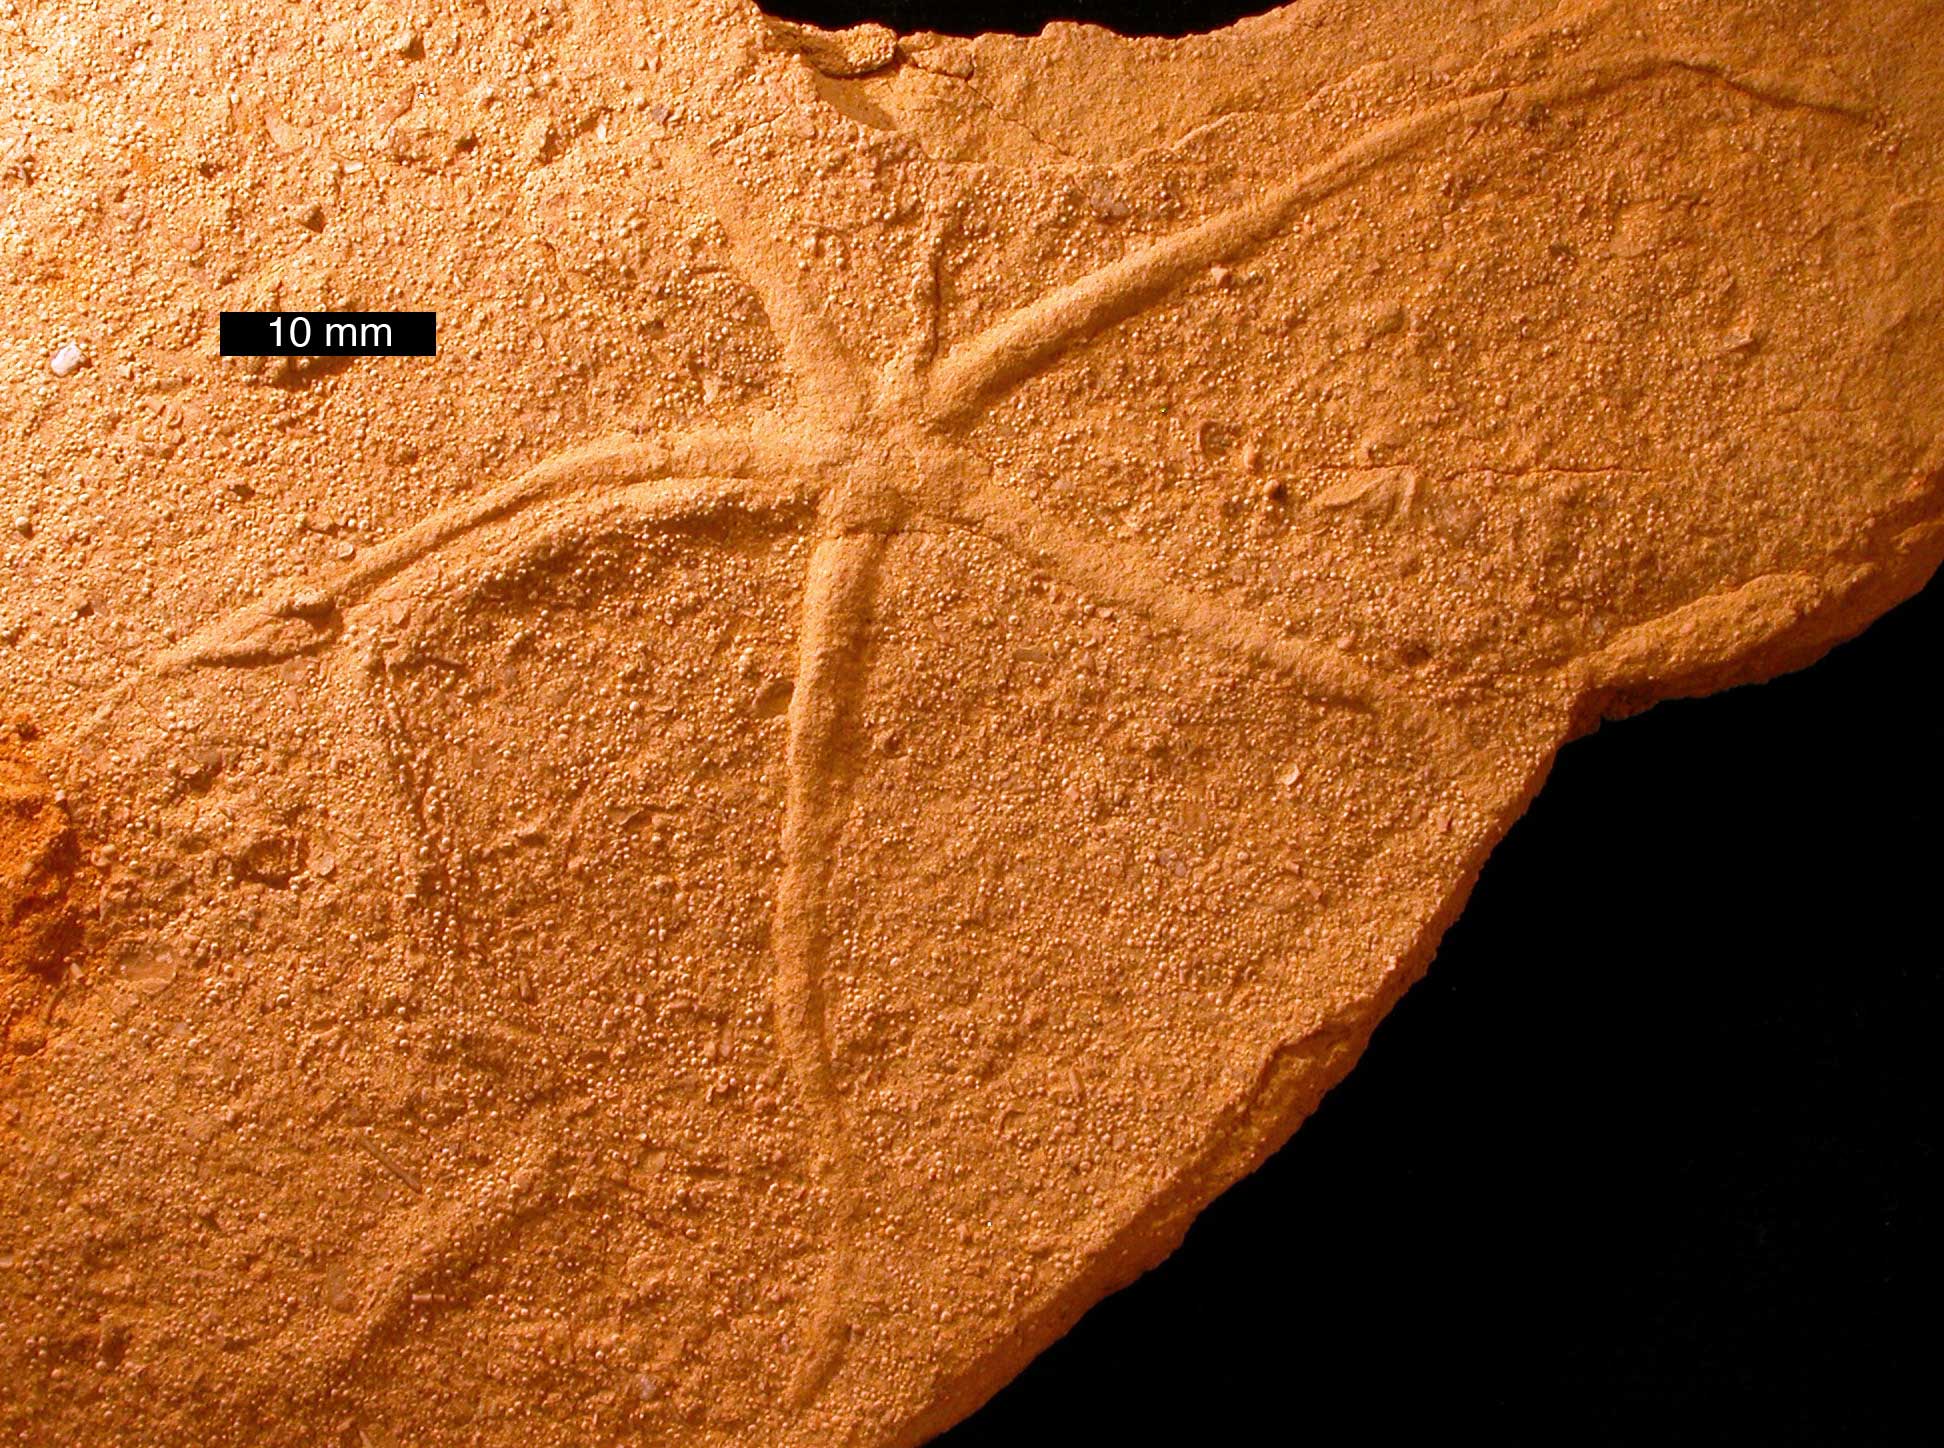 Photo of a trace fossil of a brittle star from the Jurassic of Utah. The trace is preserved on an orange rock. It is star-shaped with a small central part and long, thin arms. There are traces of 5 arms. Scale bar is 1 centimeter, much smaller than the trace.